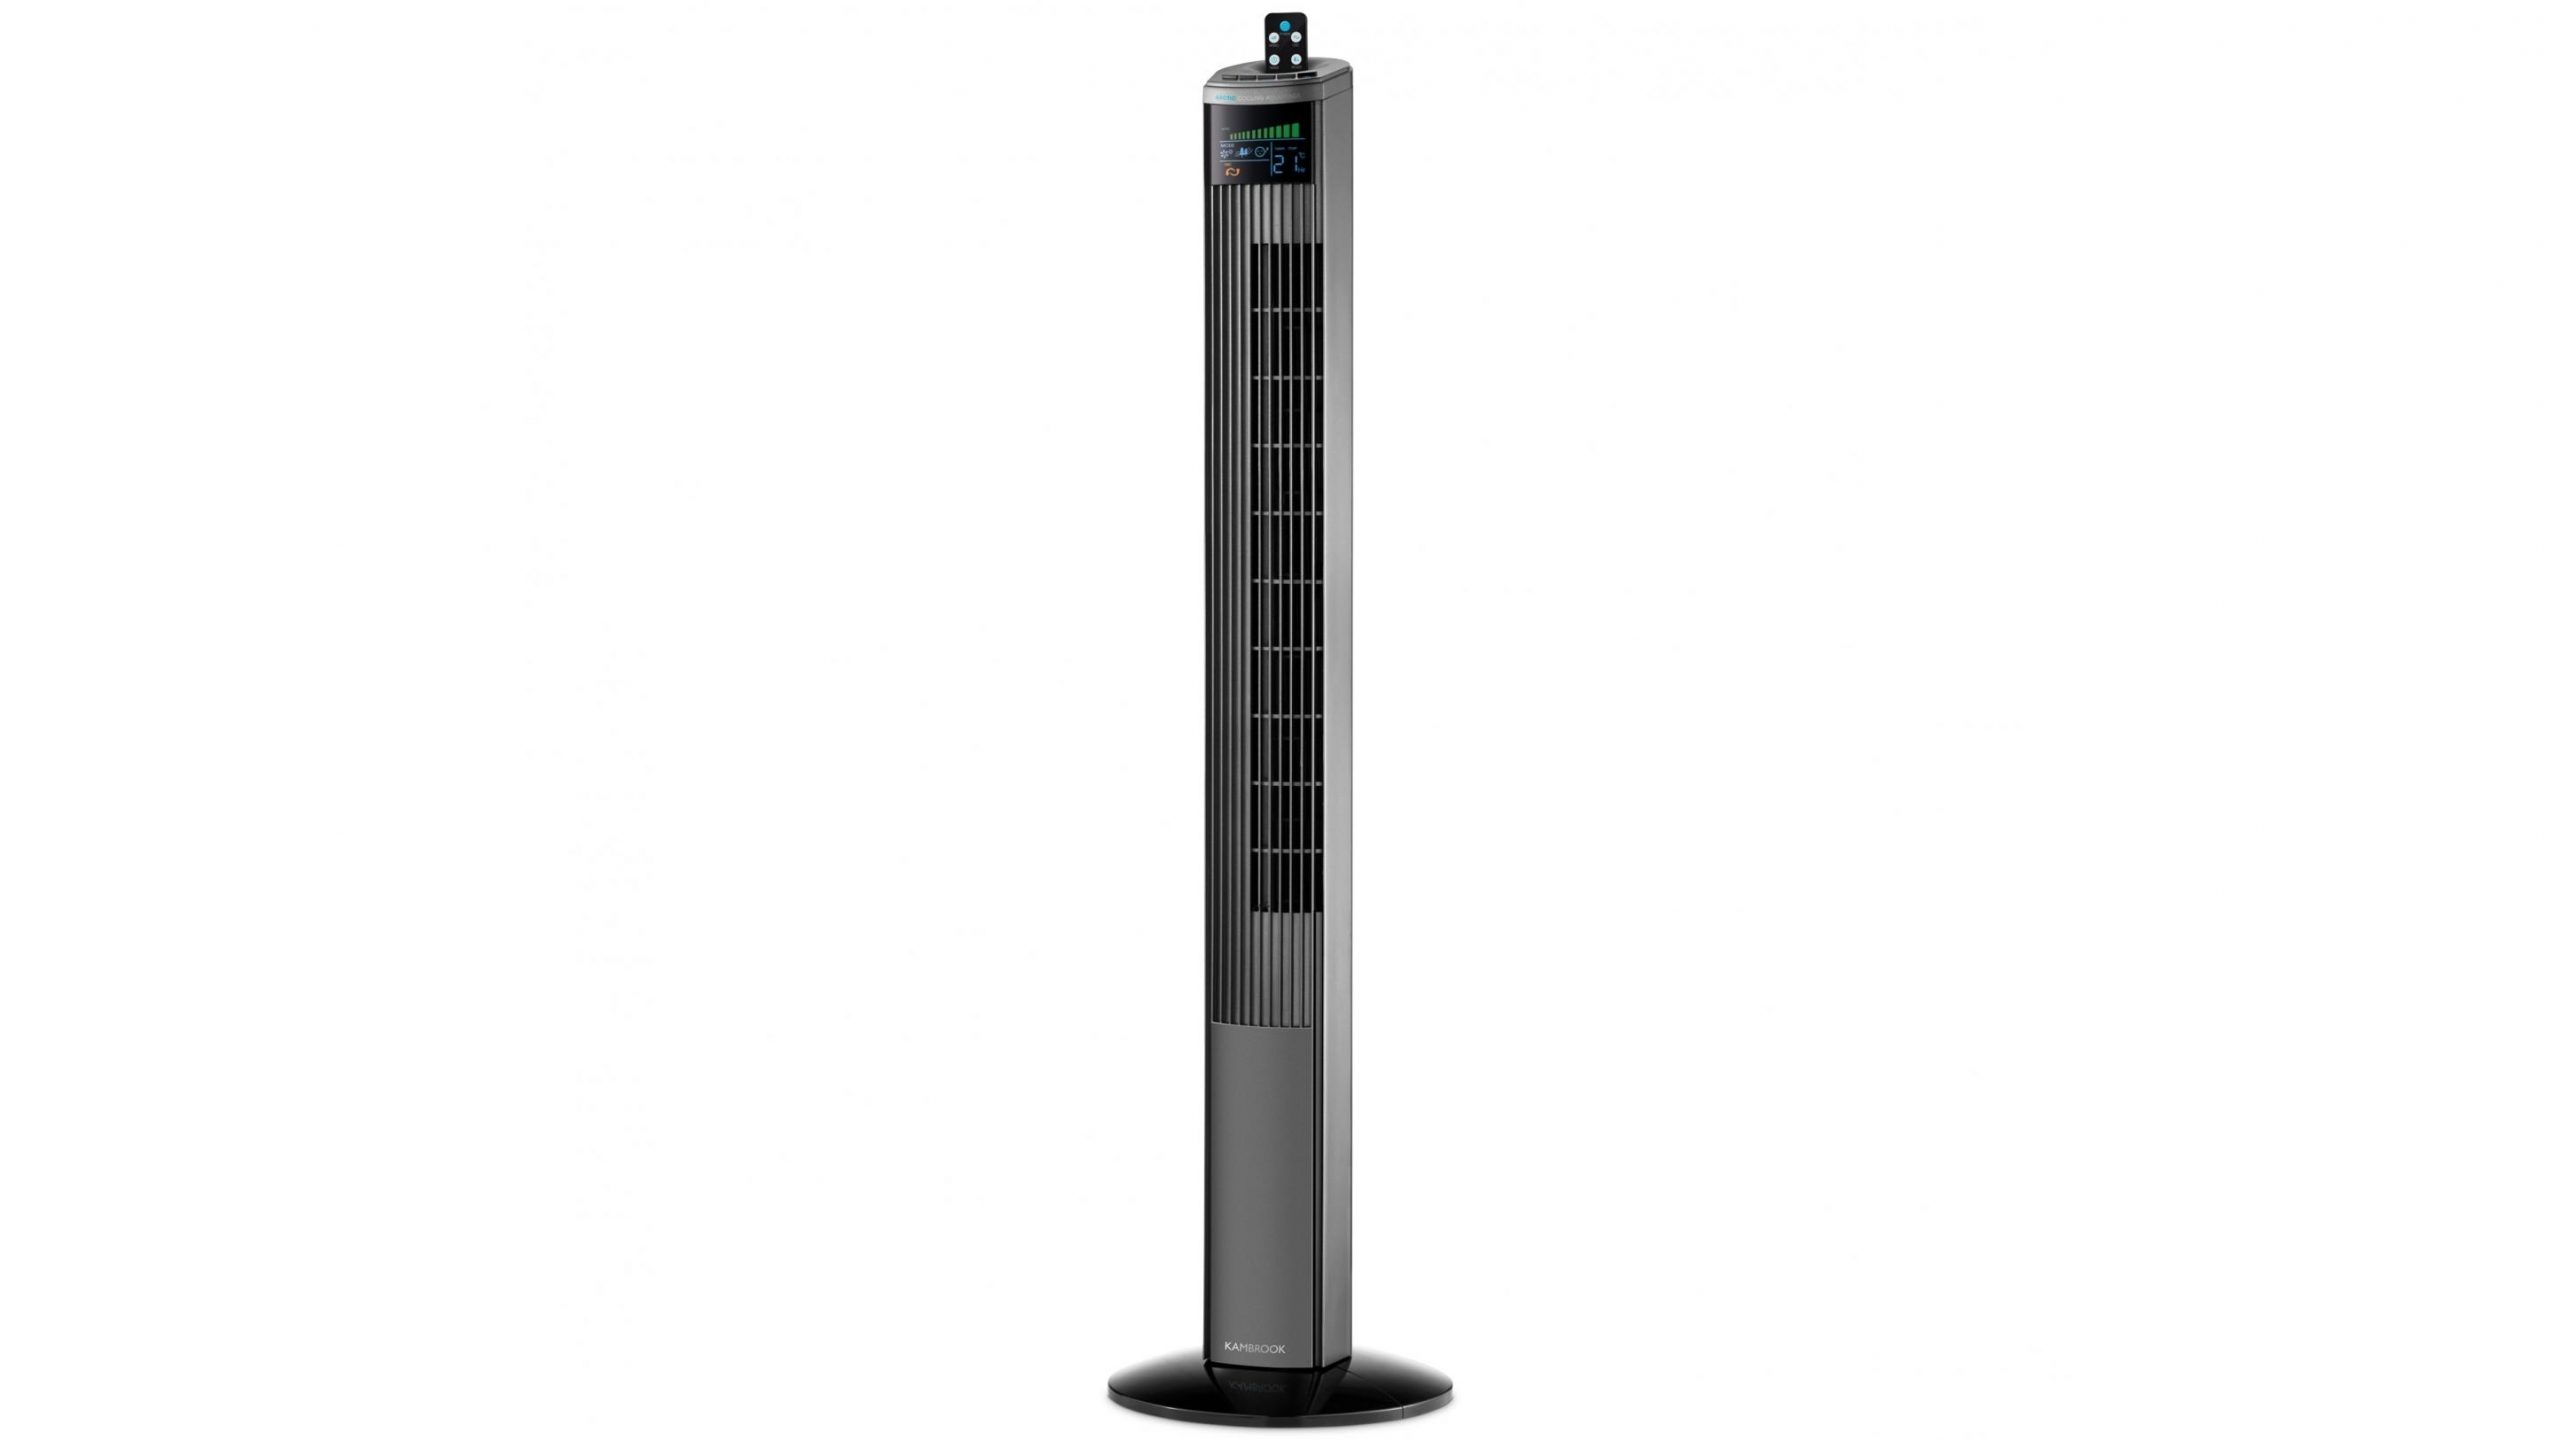 Kambrook 116cm Arctic Tower Fan With Led Display regarding dimensions 2889 X 1625